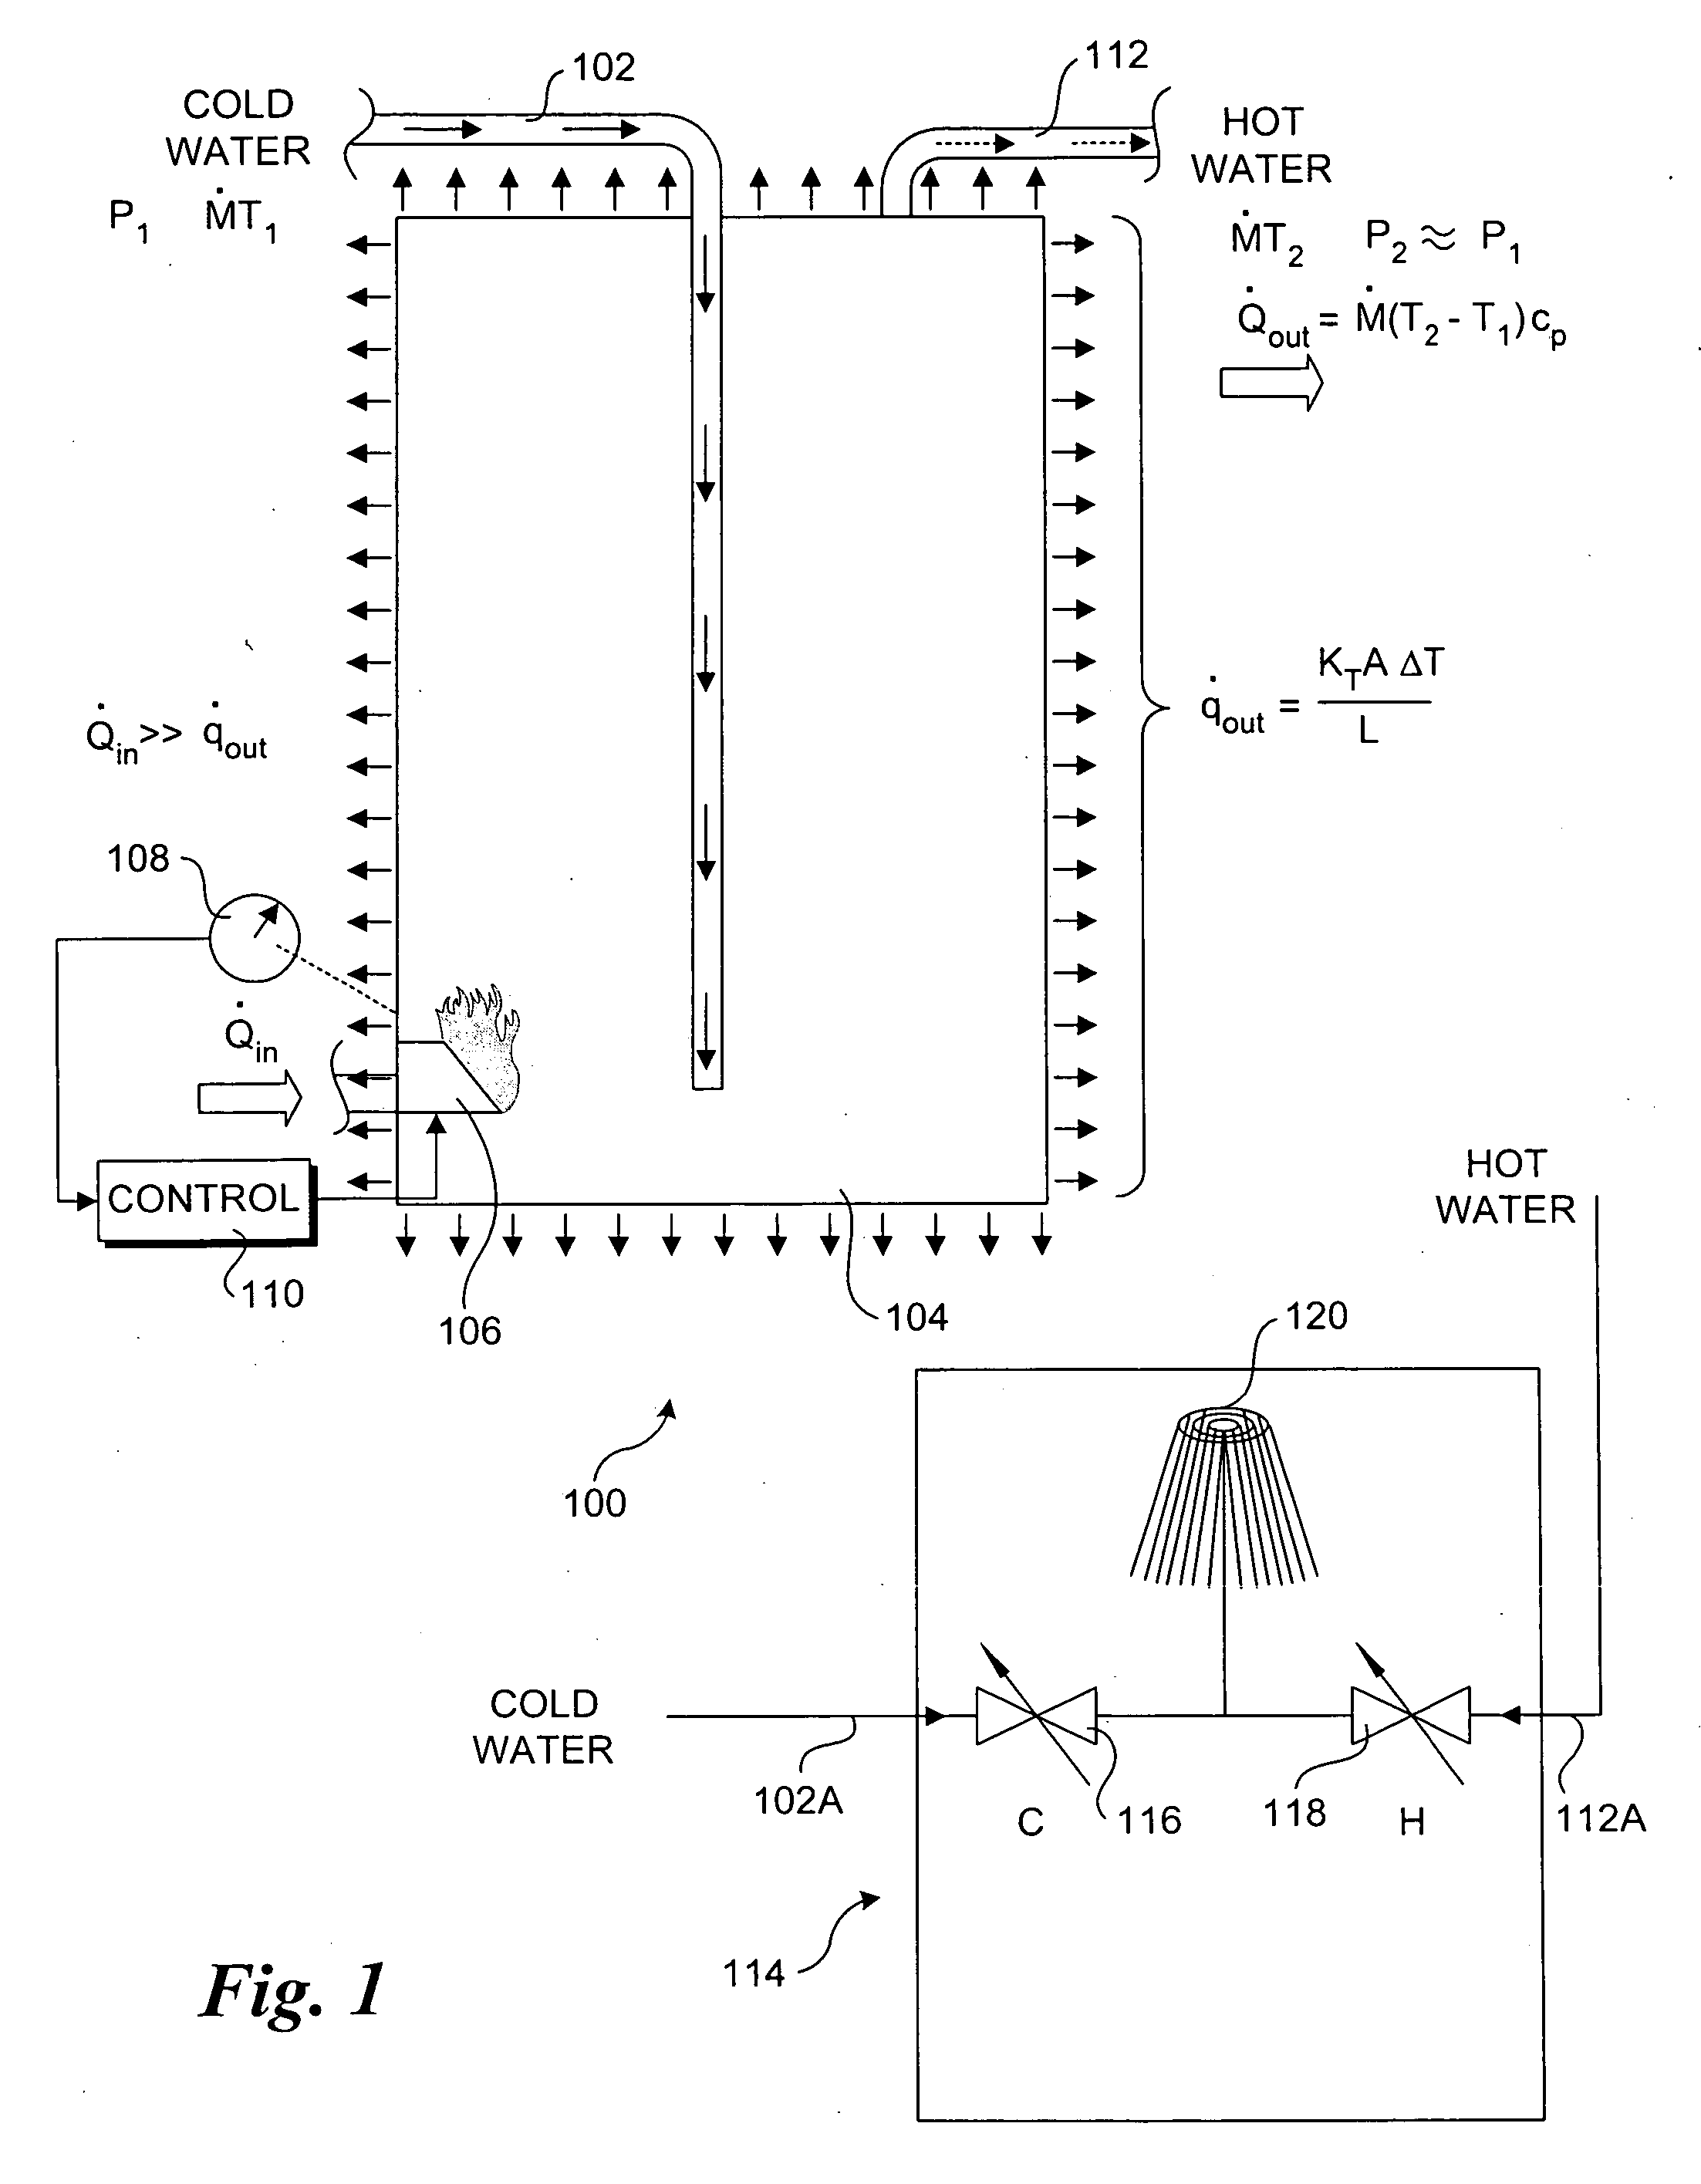 Method, apparatus, and system for projecting hot water availability for showering and bathing